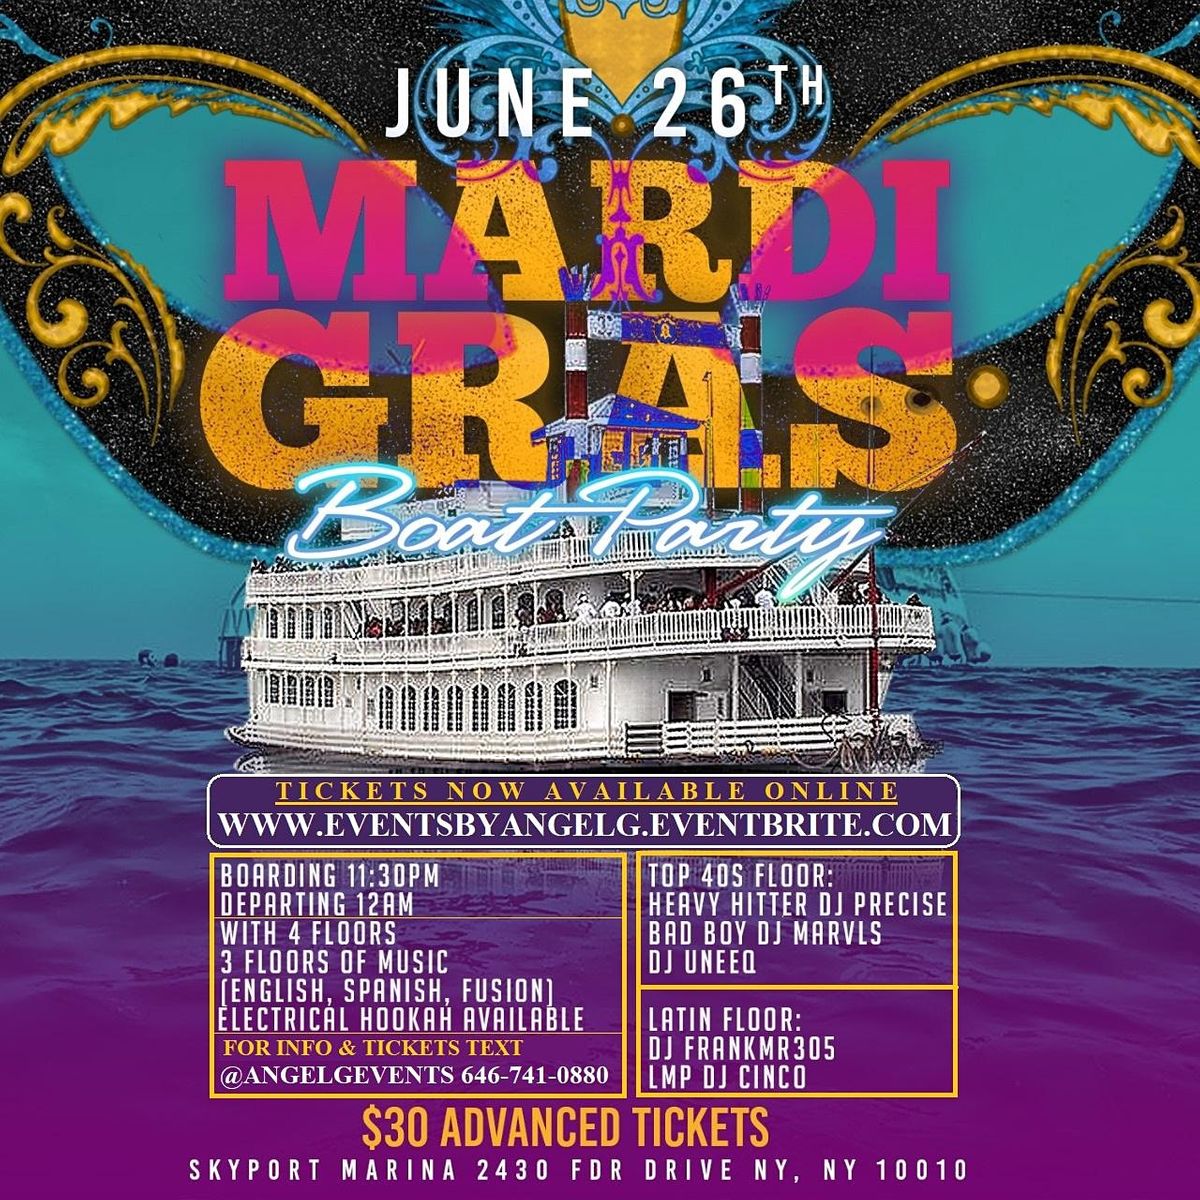 MADRI GRAS BOAT PARTY @ SKYPORT MARINA (HOSTED BY ANGEL G EVENTS)